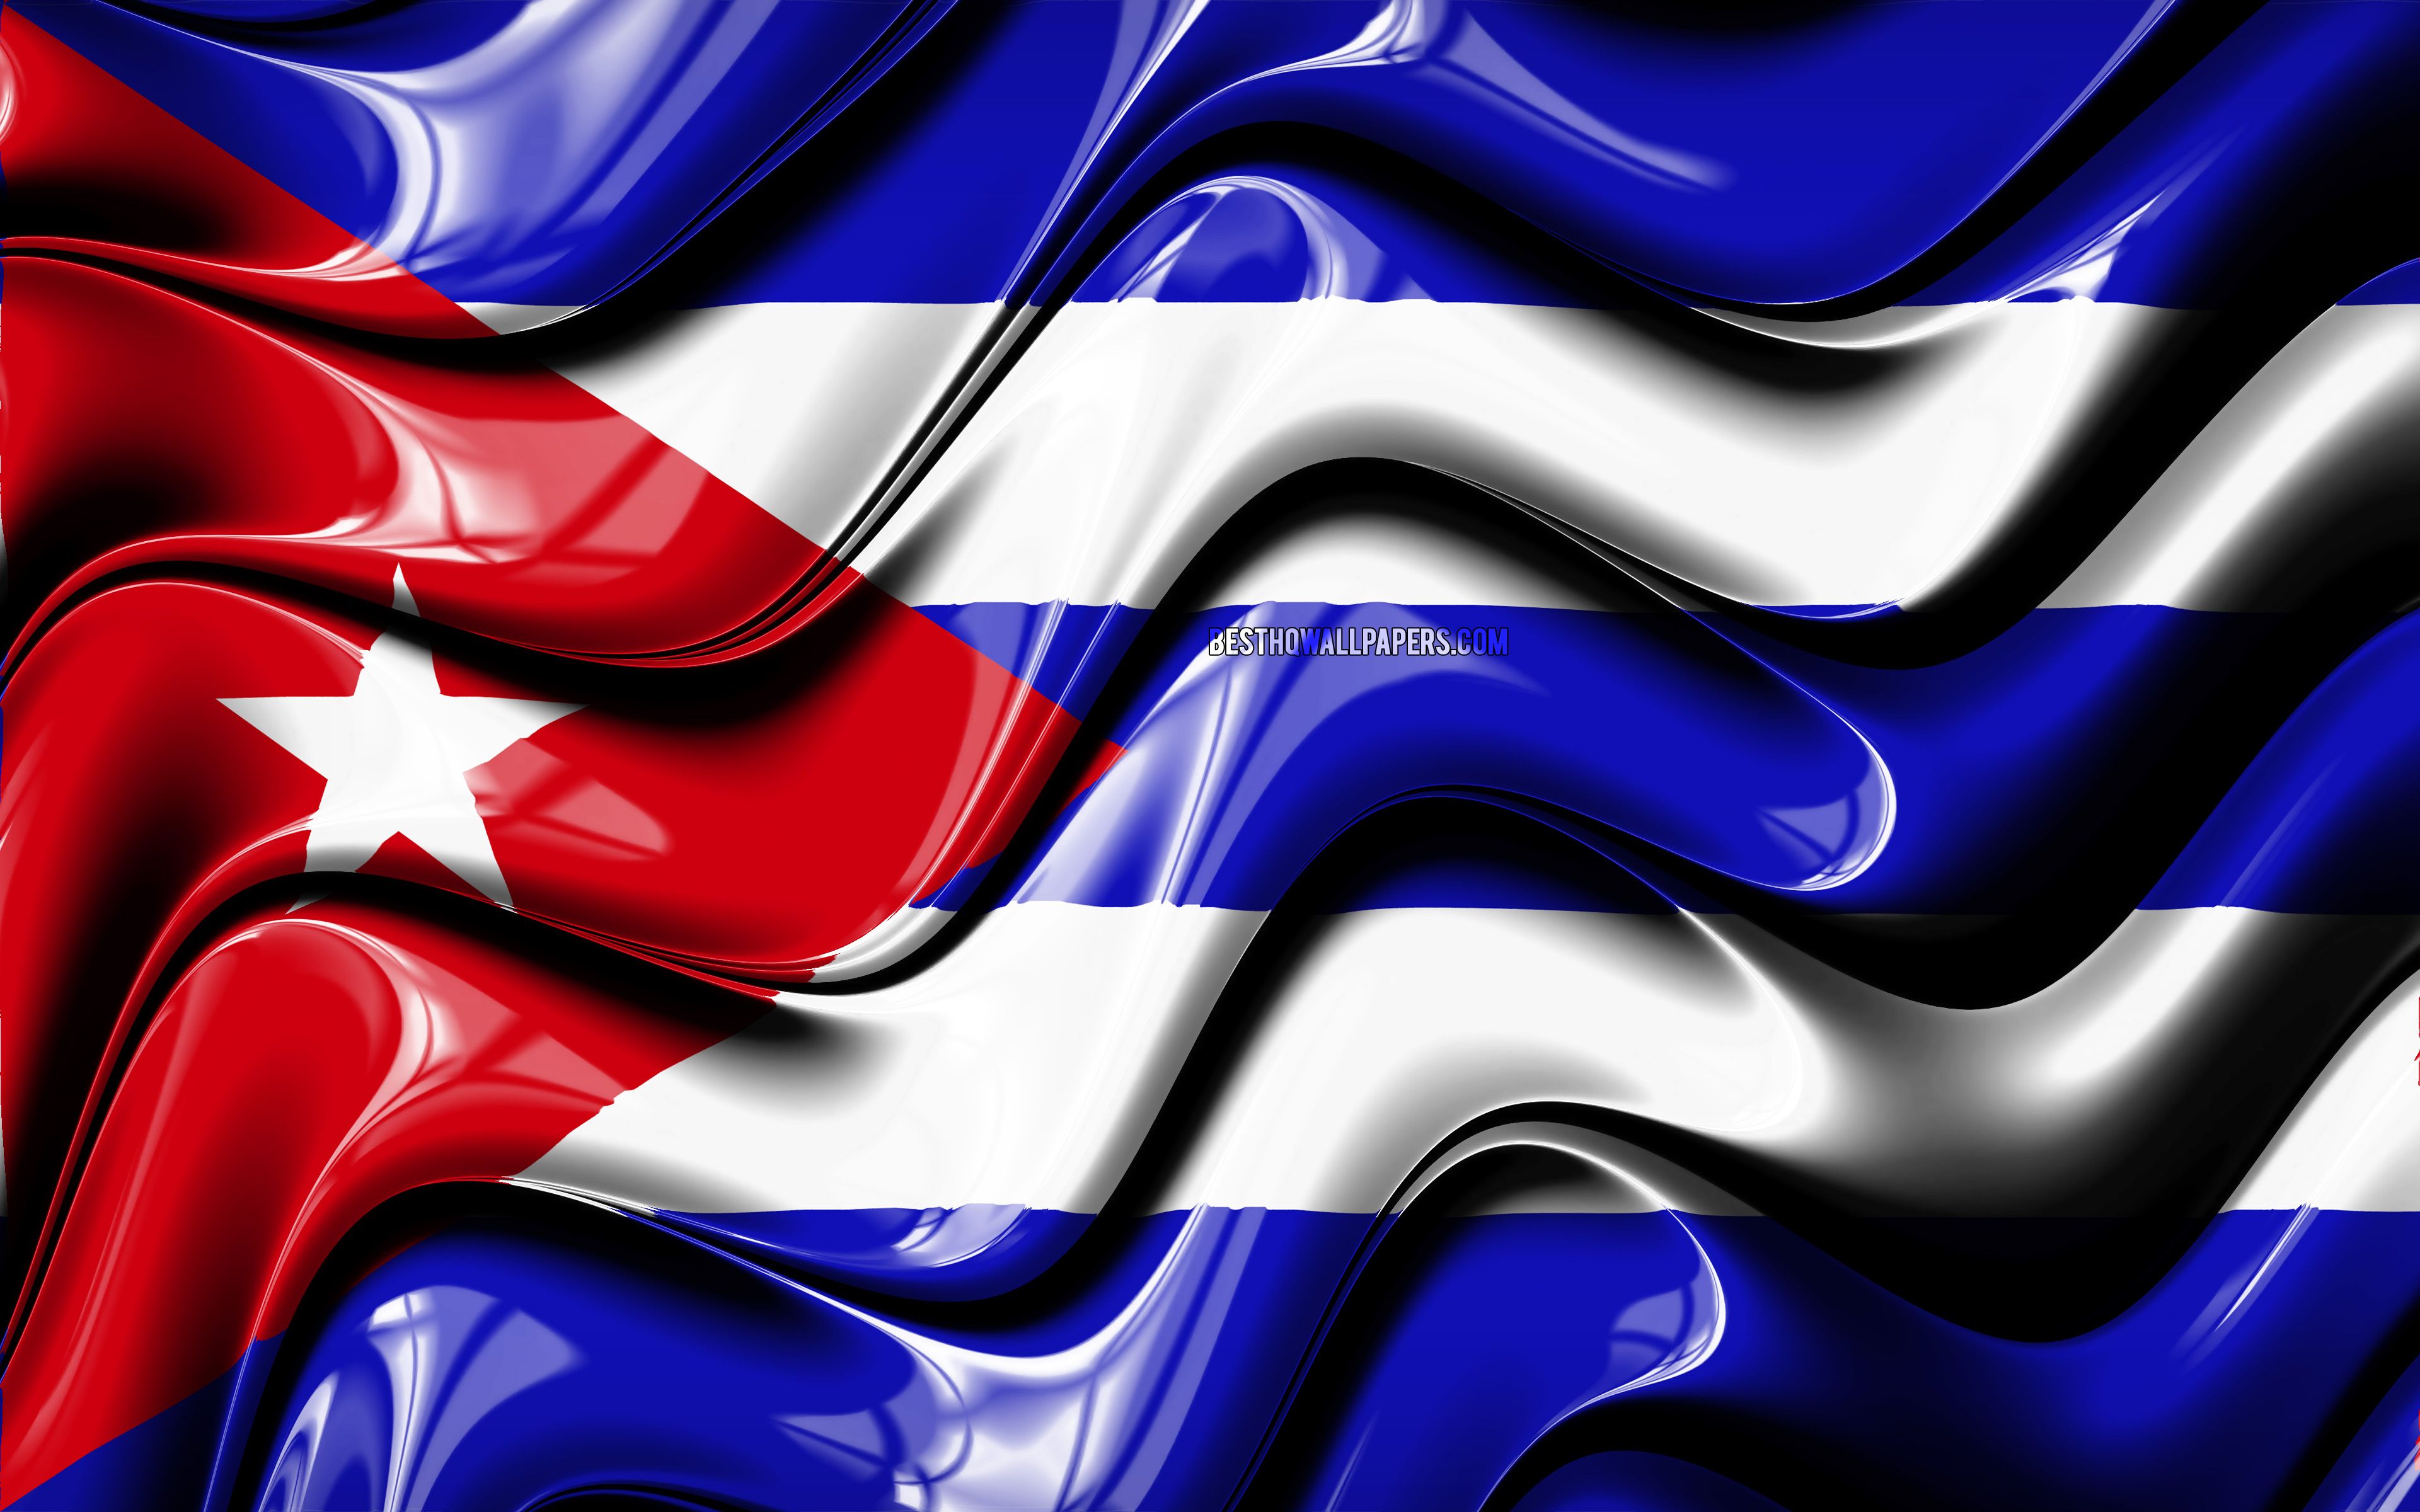 Download wallpaper Cuban flag, 4k, North America, national symbols, Flag of Cuba, 3D art, Mexico, North American countries, Cuba 3D flag for desktop with resolution 3840x2400. High Quality HD picture wallpaper